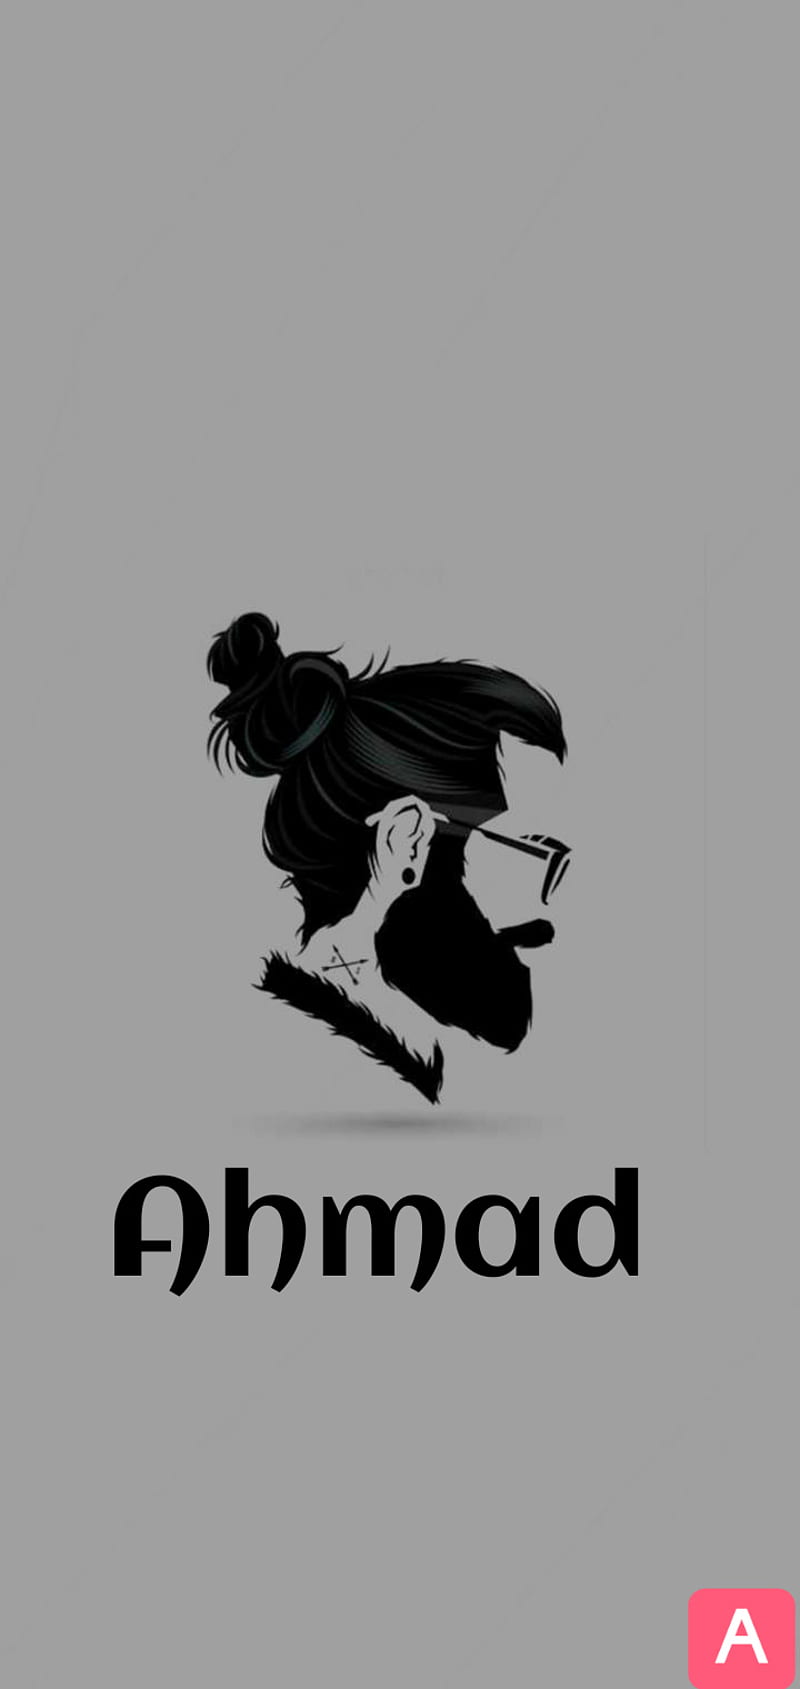 Ahmed Logo Vector Art, Icons, and Graphics for Free Download